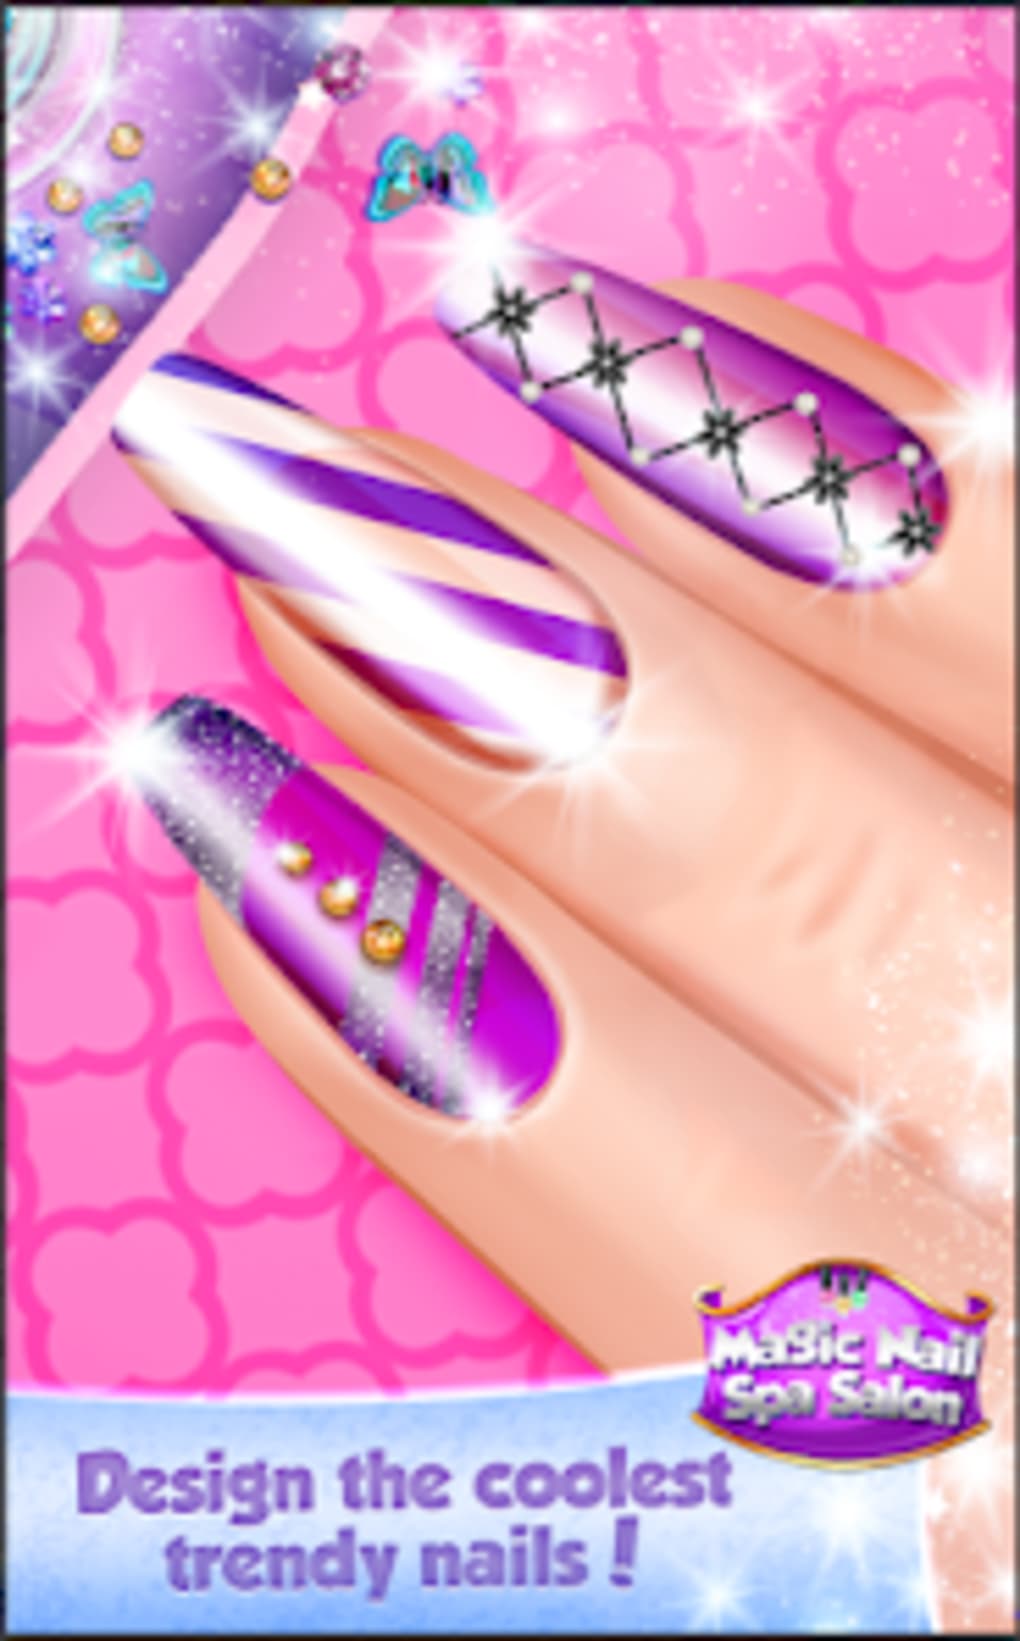 Fashion Nail Salon Old APK 2.0(2000000): Enjoy smoother gameplay and fewer  crashes!